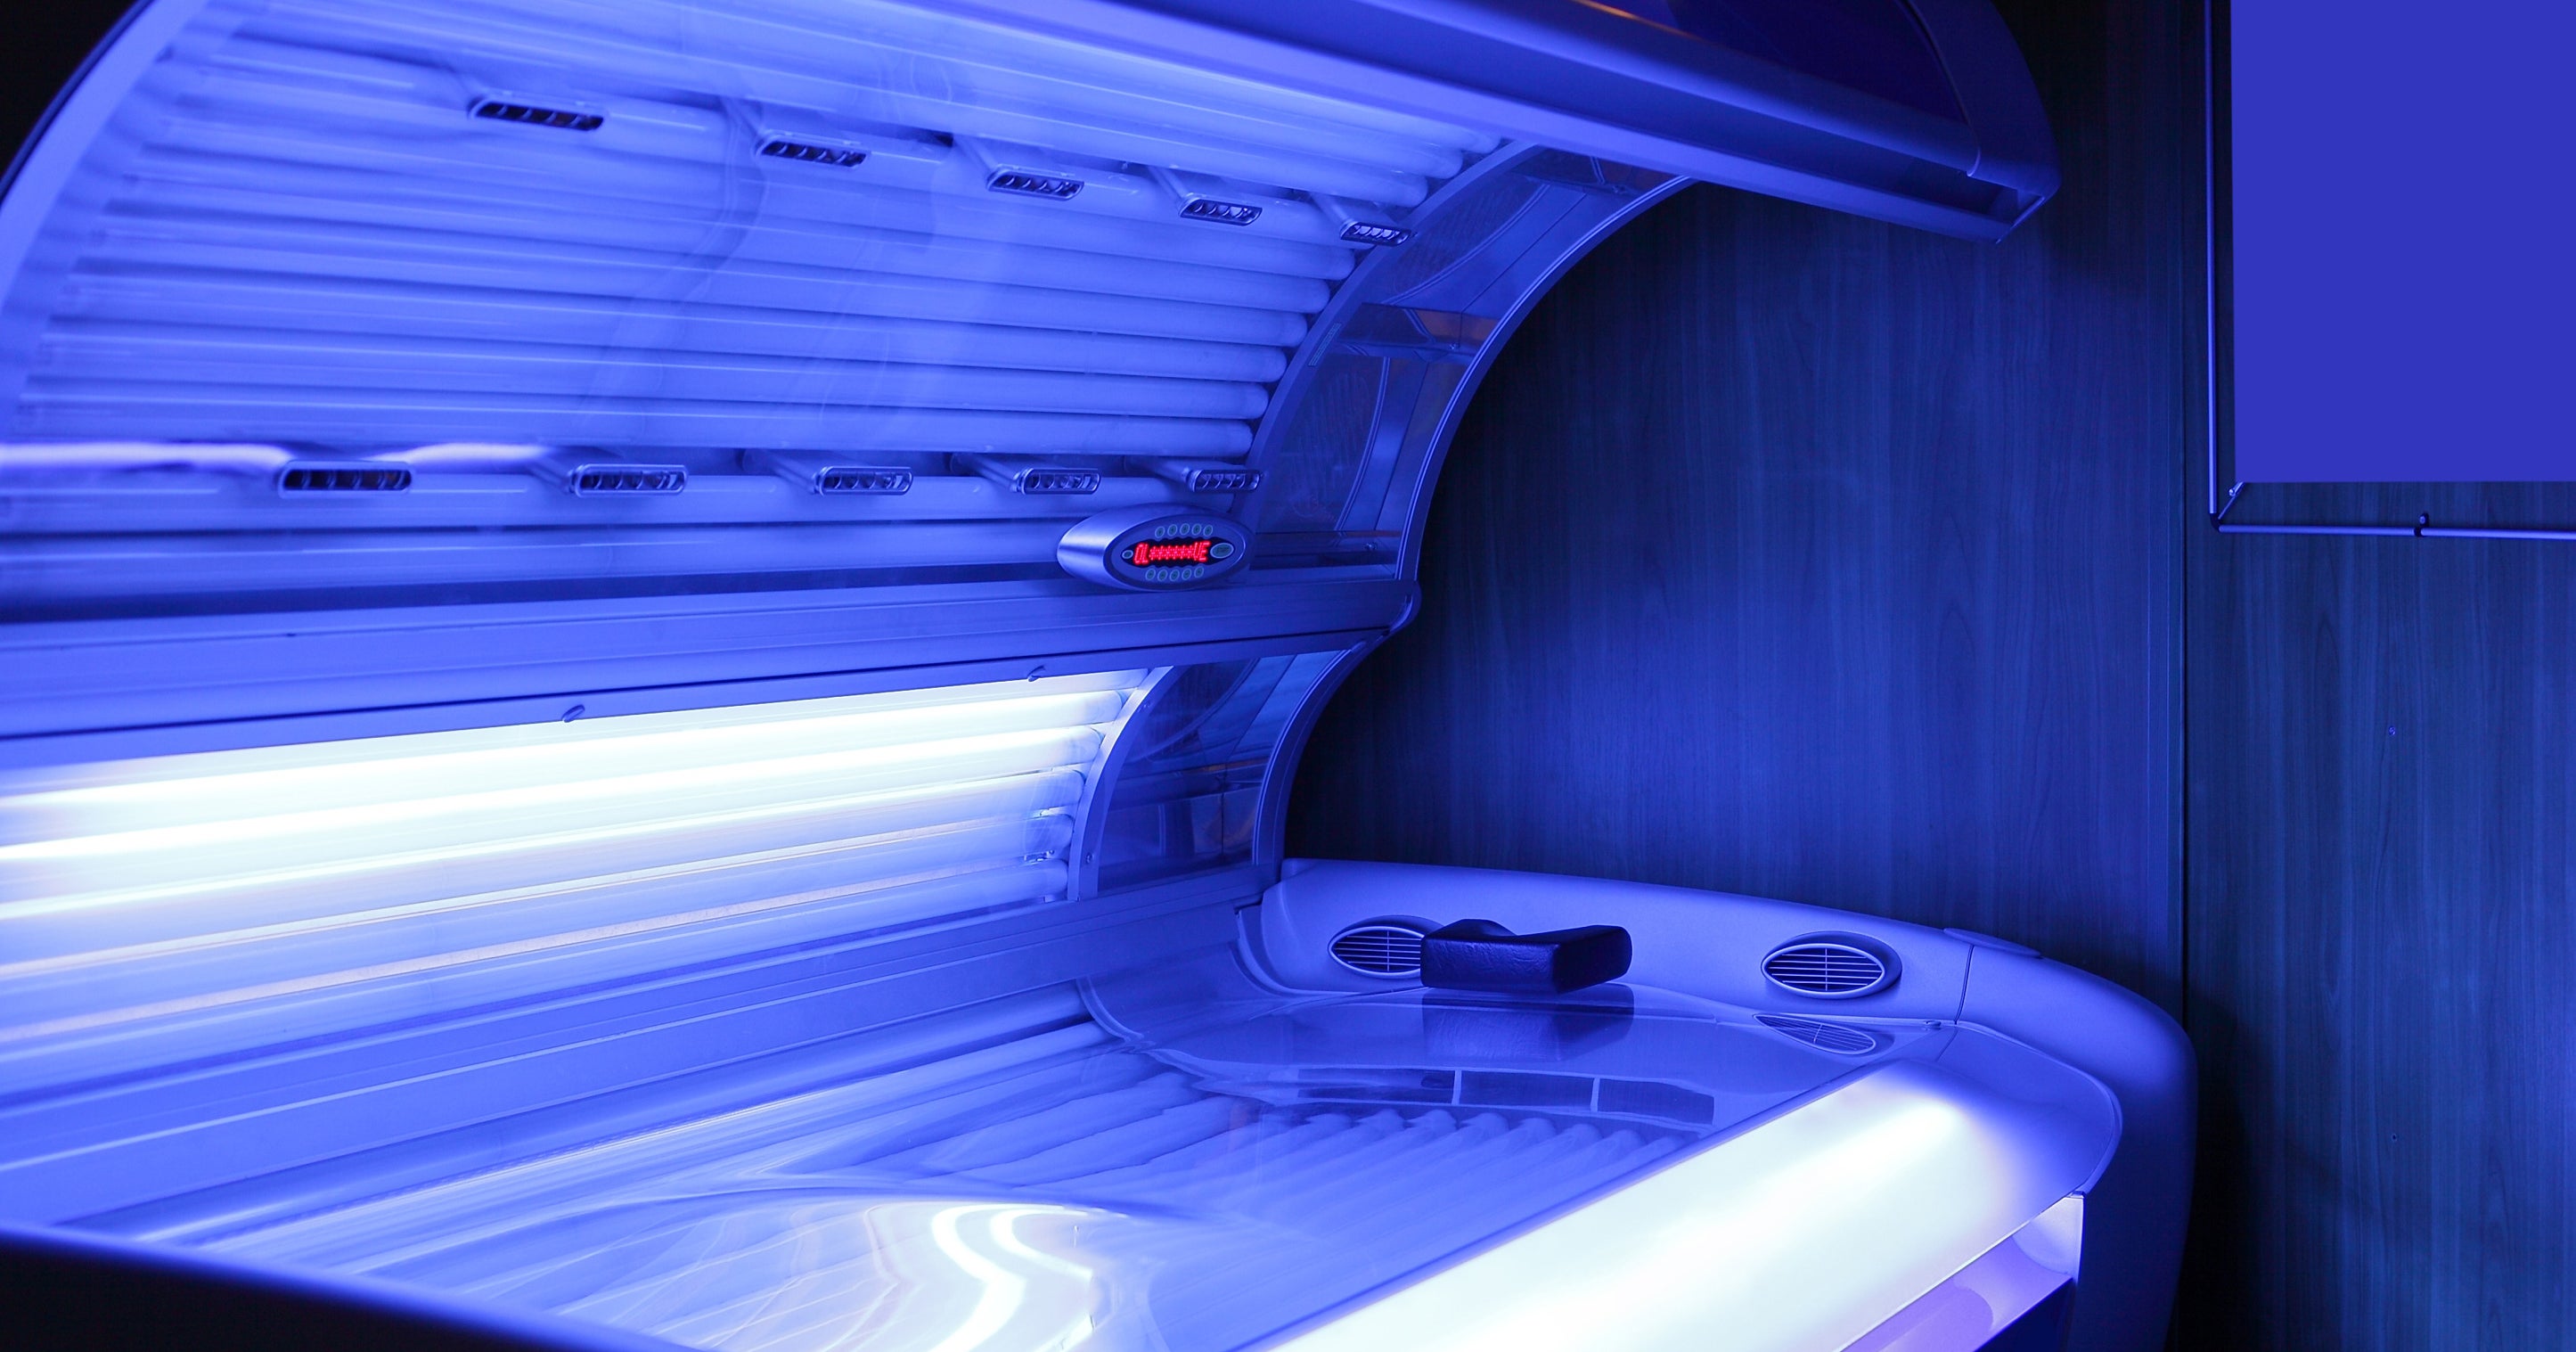 The Real Reasons Why Tanning Beds Aren’t Yet Banned In The UK